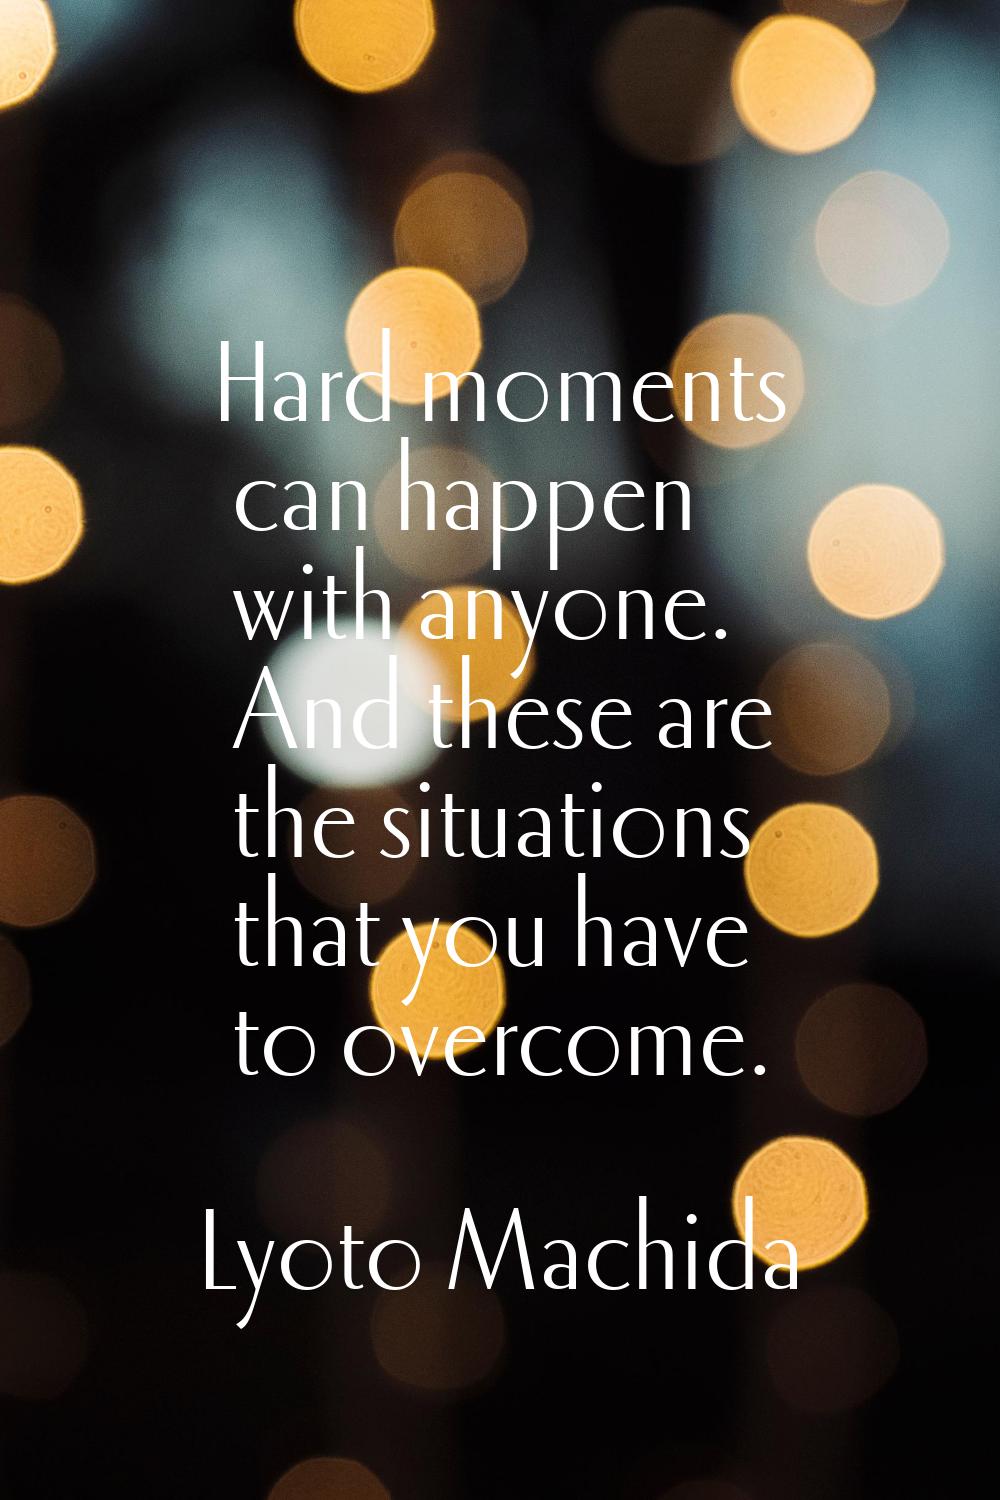 Hard moments can happen with anyone. And these are the situations that you have to overcome.